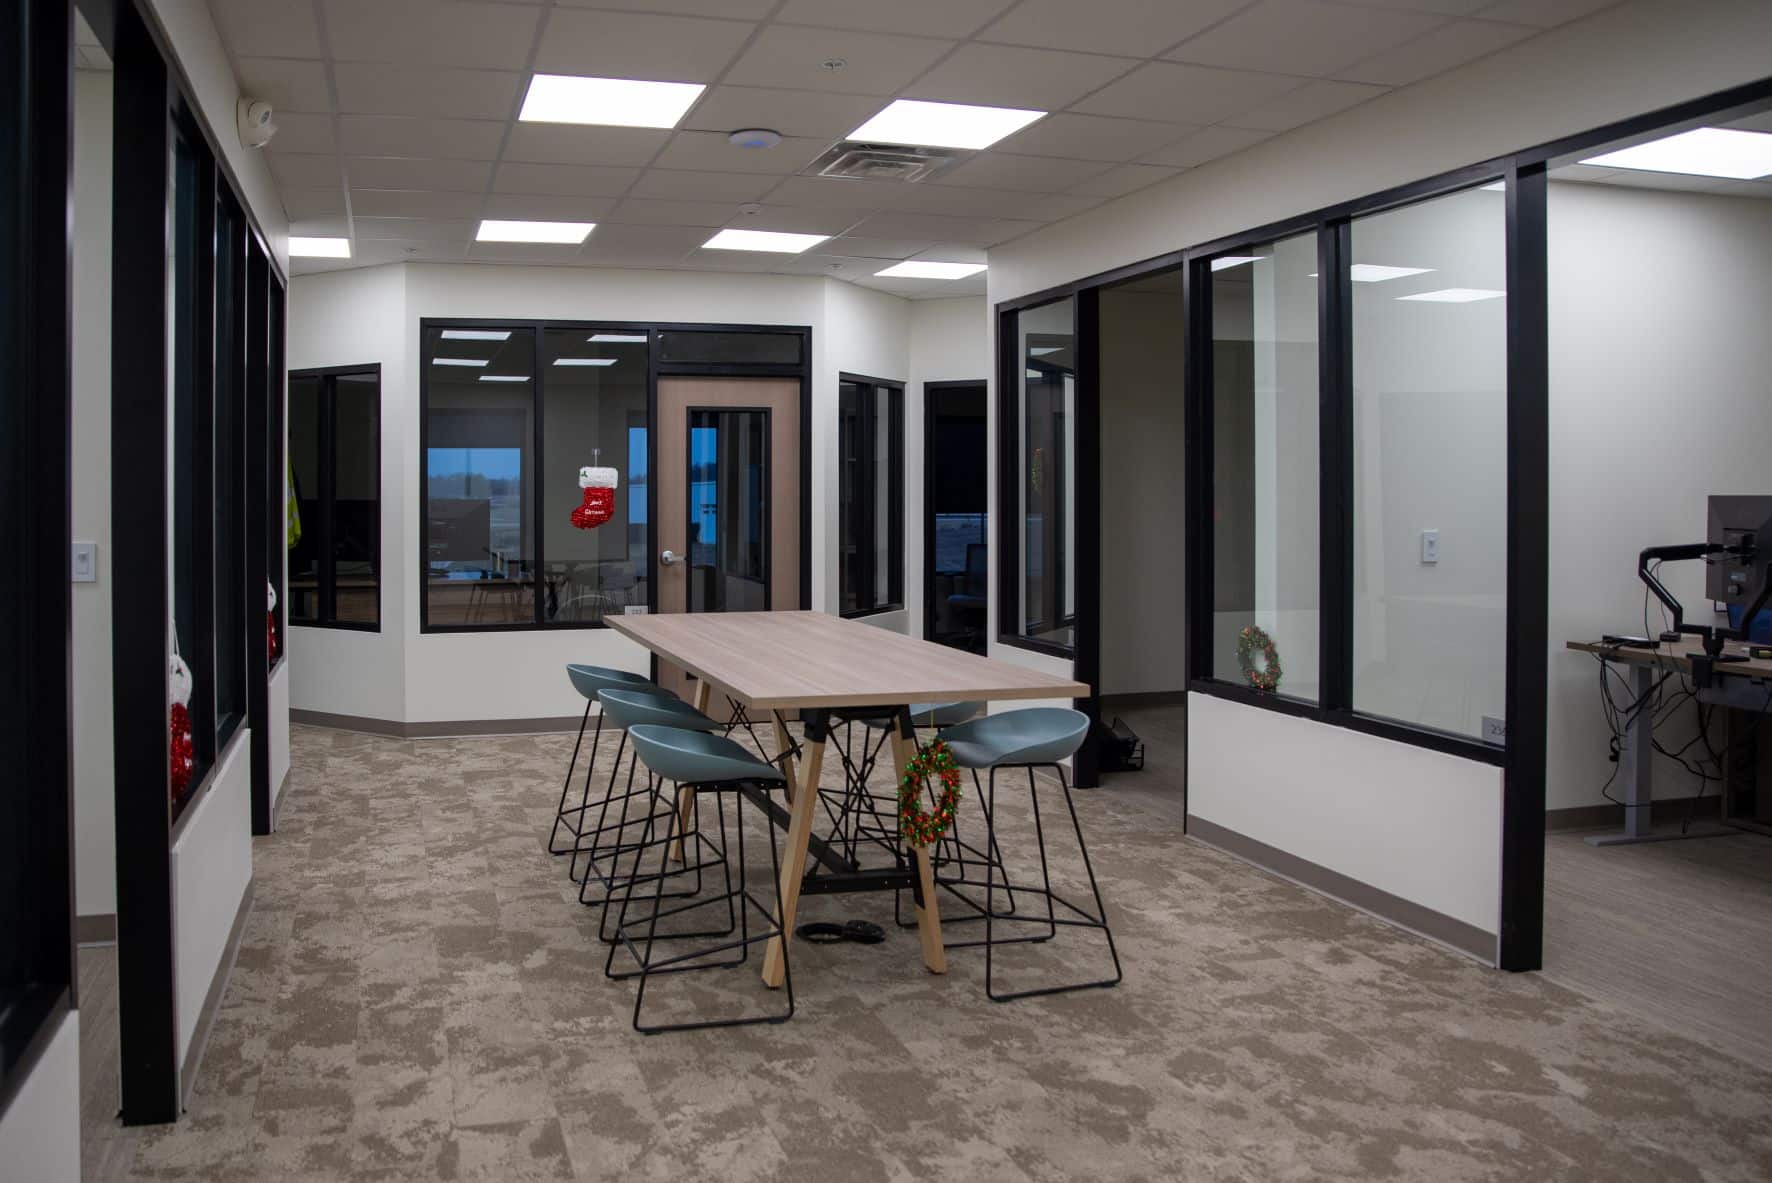 small conference table and chairs in open area between glass walled offices